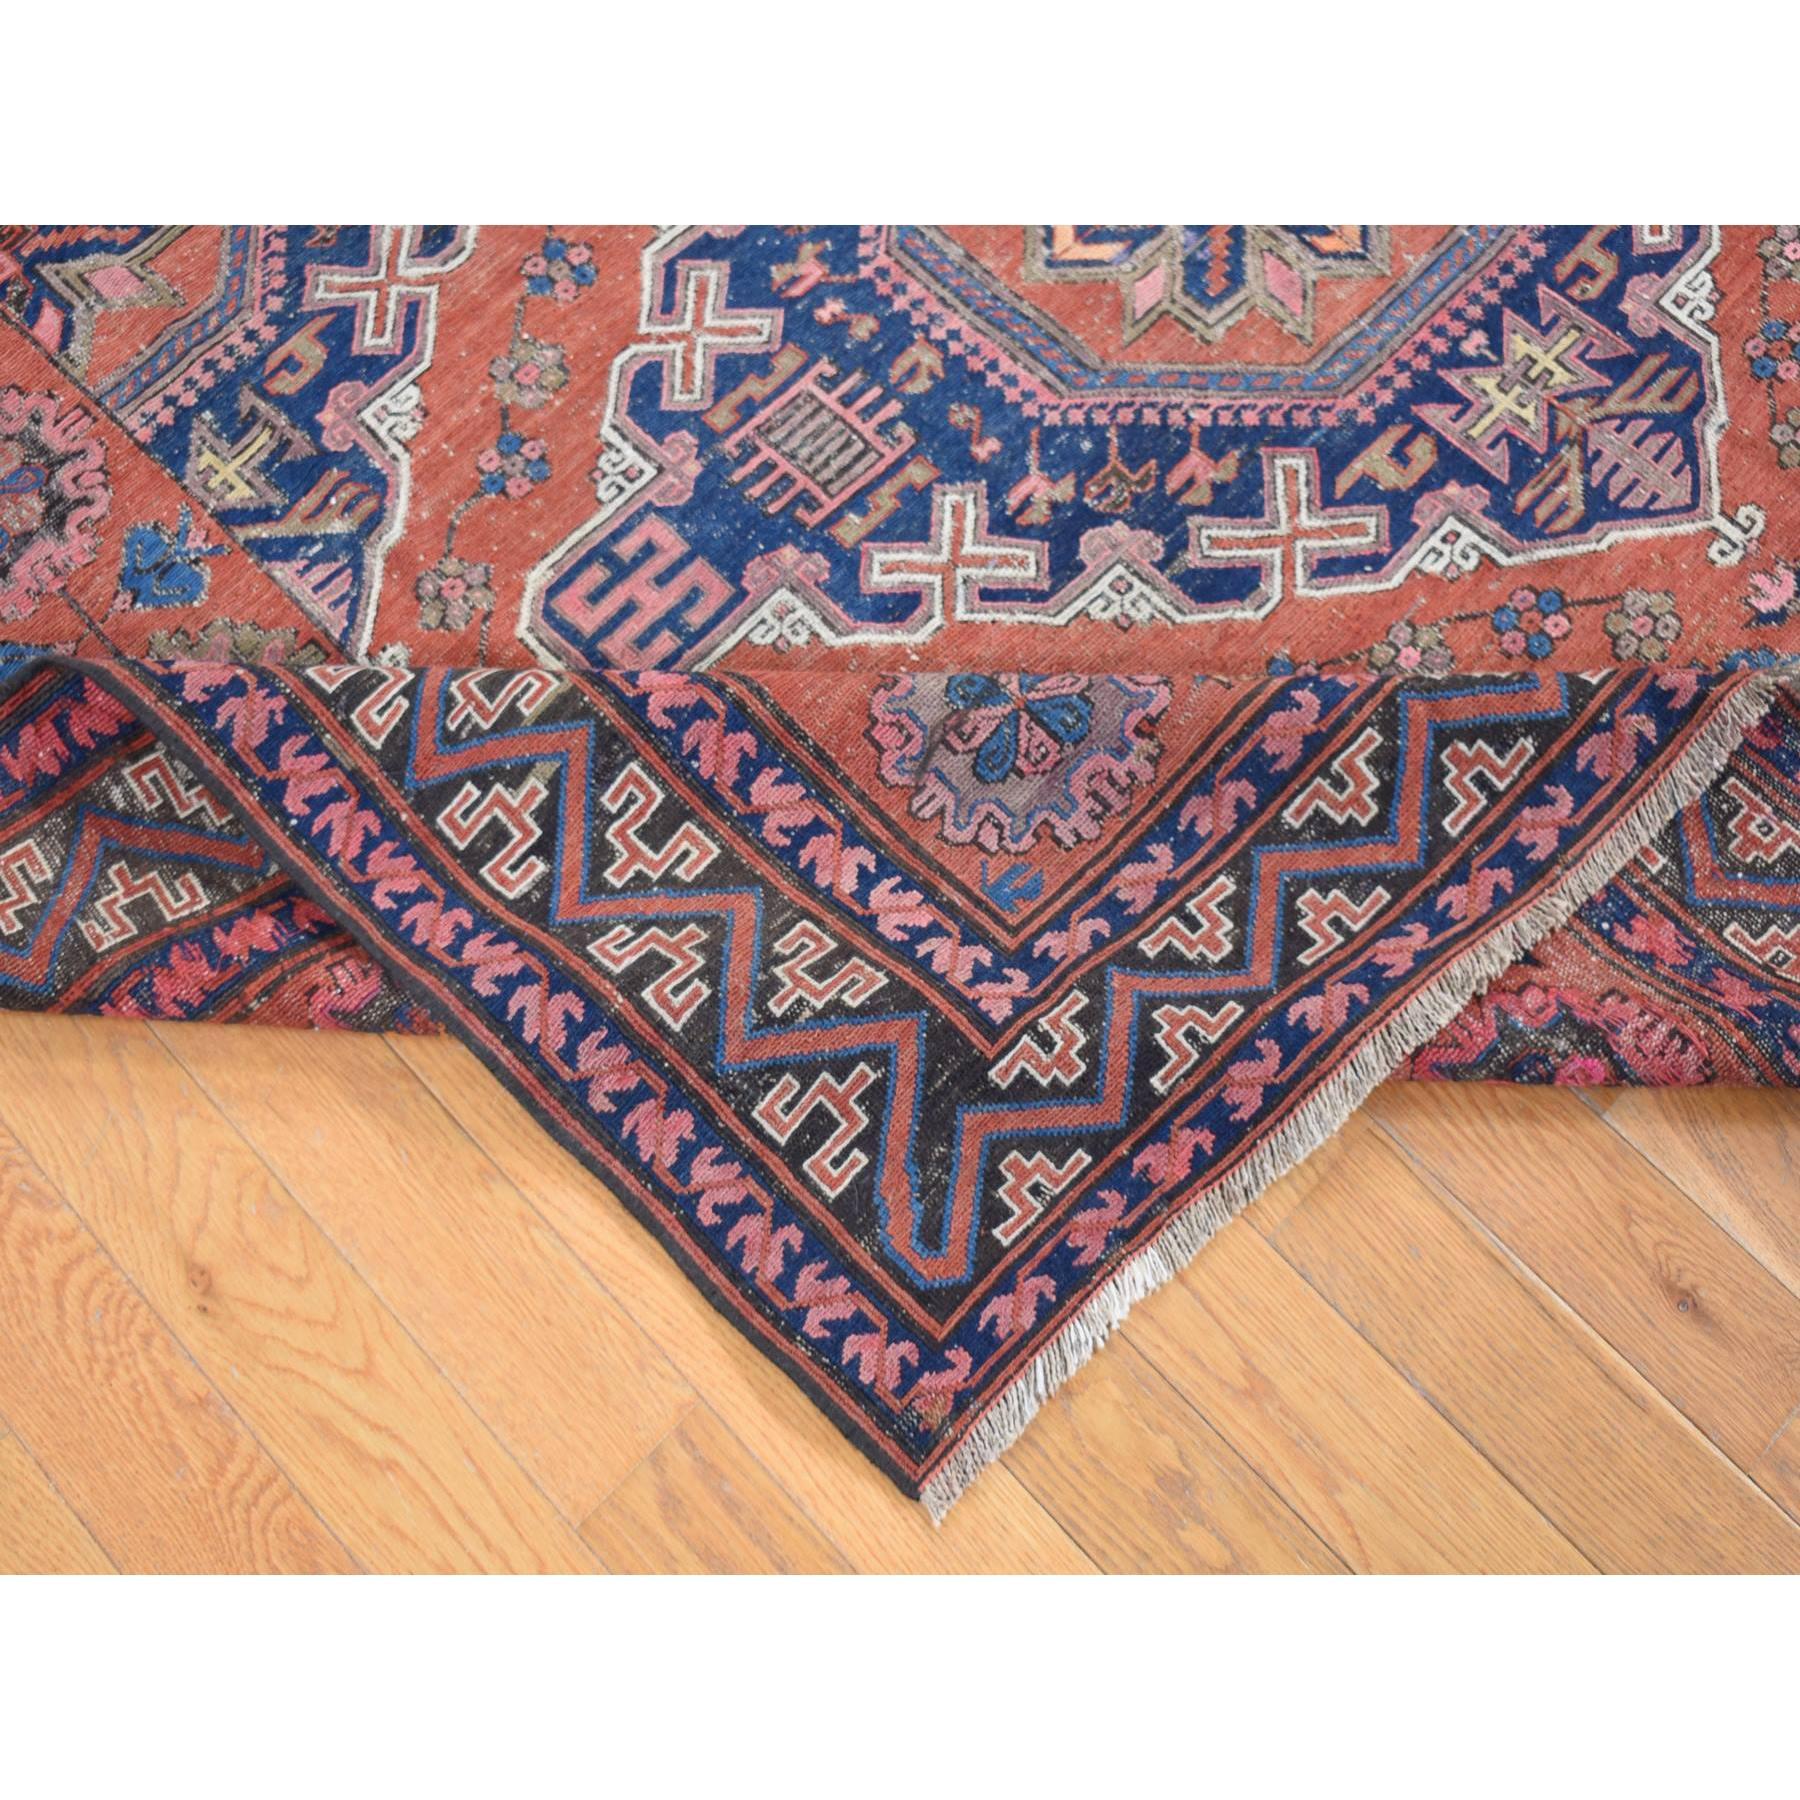 Cinnamon Red Antique Caucasian Soumak Pure Wool Flat Weave Hand Knotted Rug In Good Condition For Sale In Carlstadt, NJ